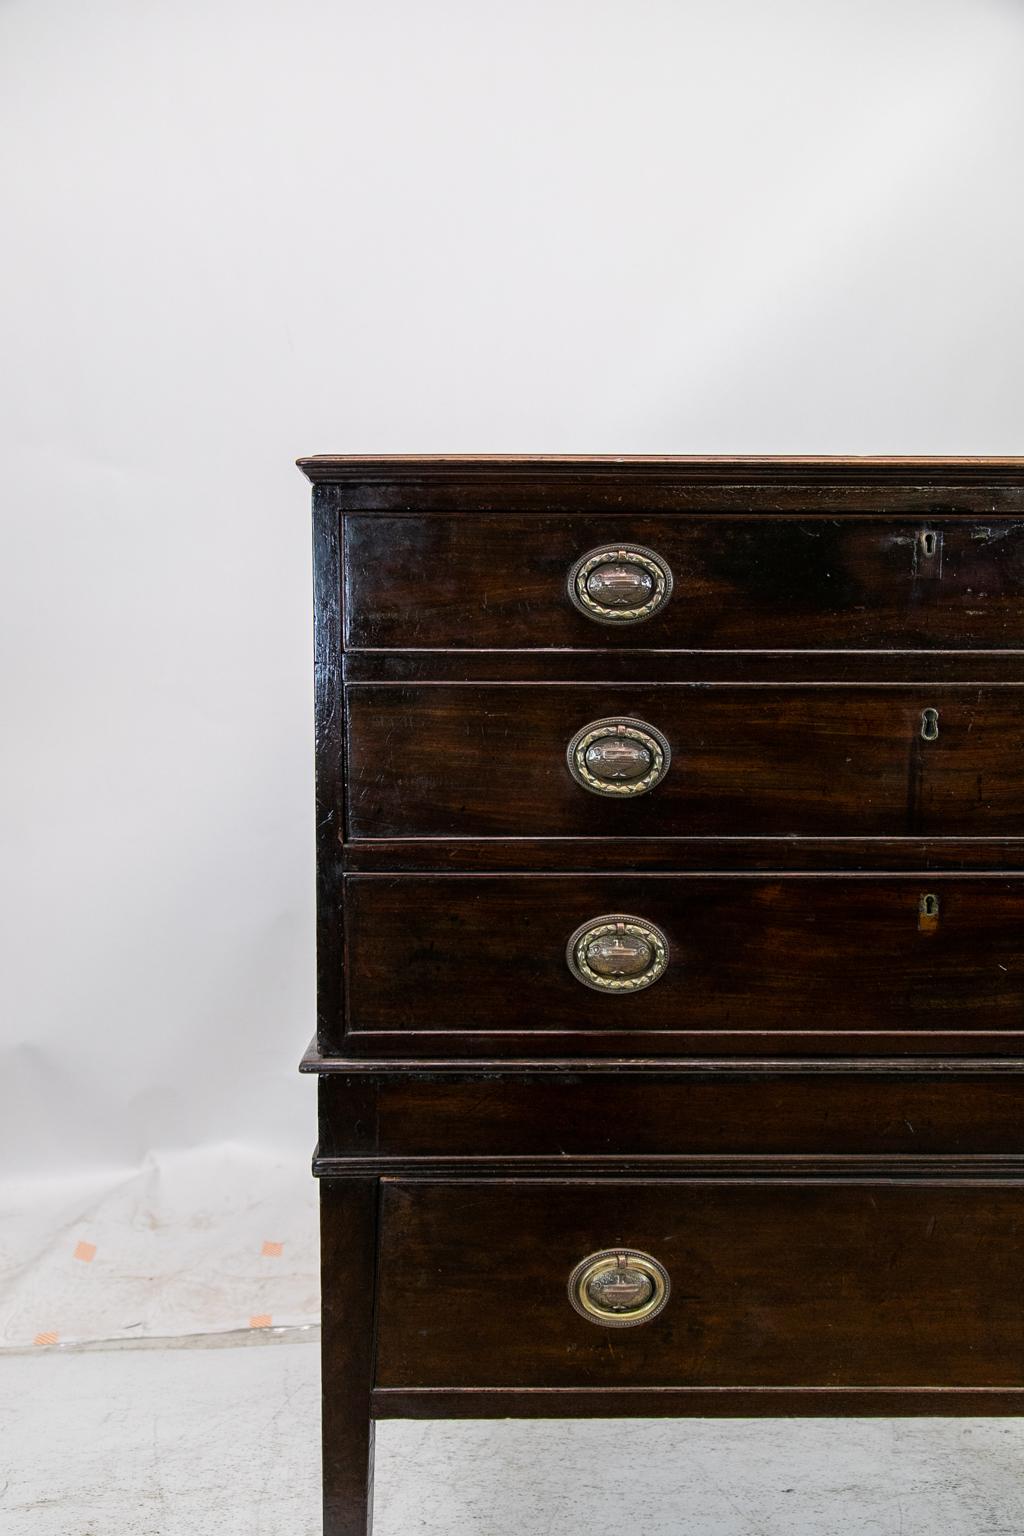 The top of this English Hepplewhite secretaire has two drawer fronts that drop down to reveal the secretary interior. There are six small and two larger drawers which have the original brass knobs. There is a small drawer inside the prospect door.